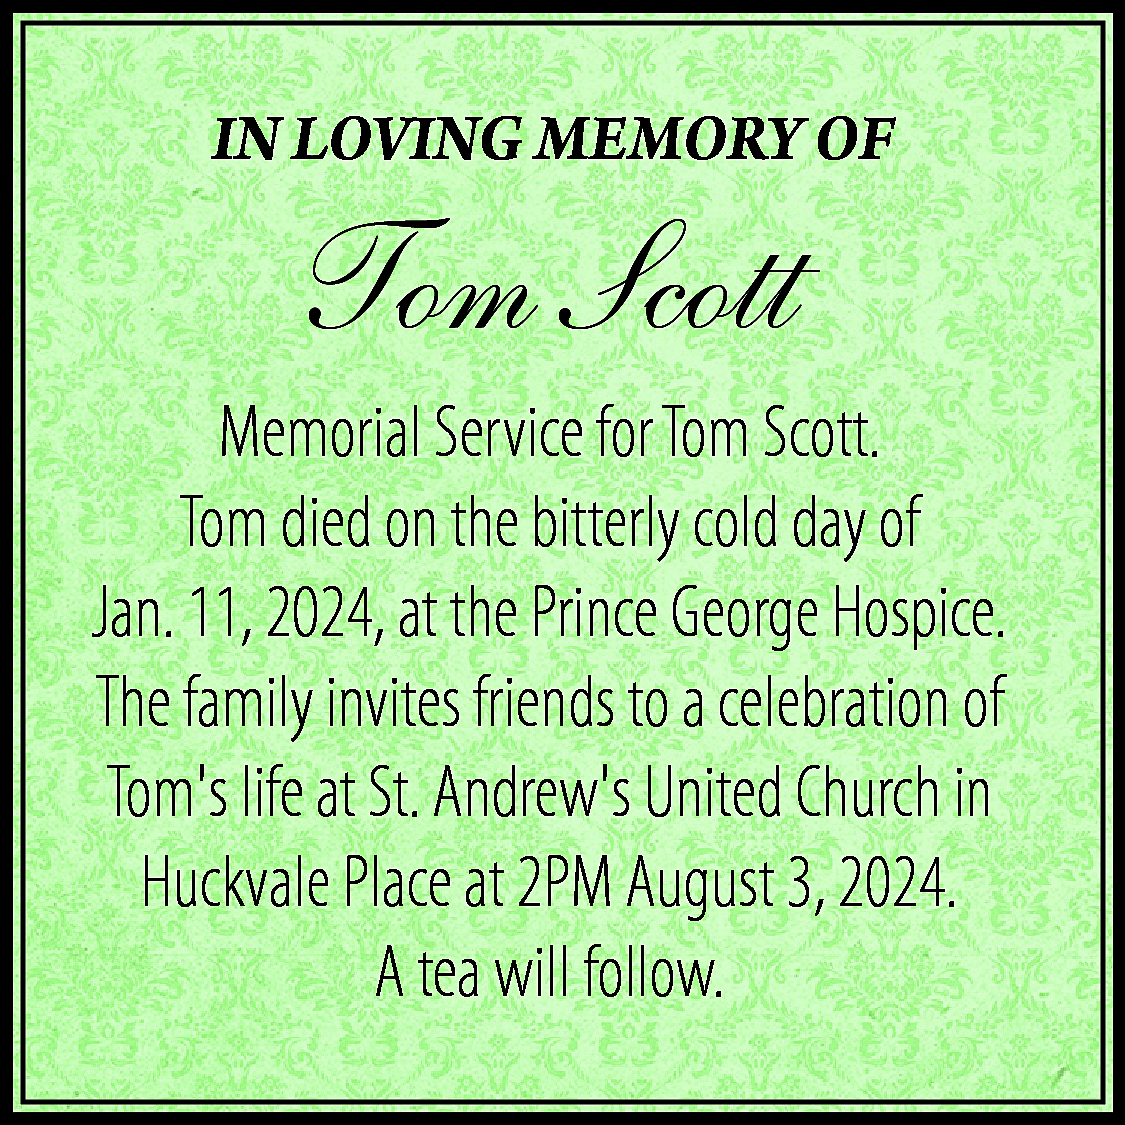 IN LOVING MEMORY OF <br>  IN LOVING MEMORY OF    Tom Scott  Memorial Service for Tom Scott.  Tom died on the bitterly cold day of  Jan. 11, 2024, at the Prince George Hospice.  The family invites friends to a celebration of  Toms life at St. Andrews United Church in  Huckvale Place at 2PM August 3, 2024.  A tea will follow.    